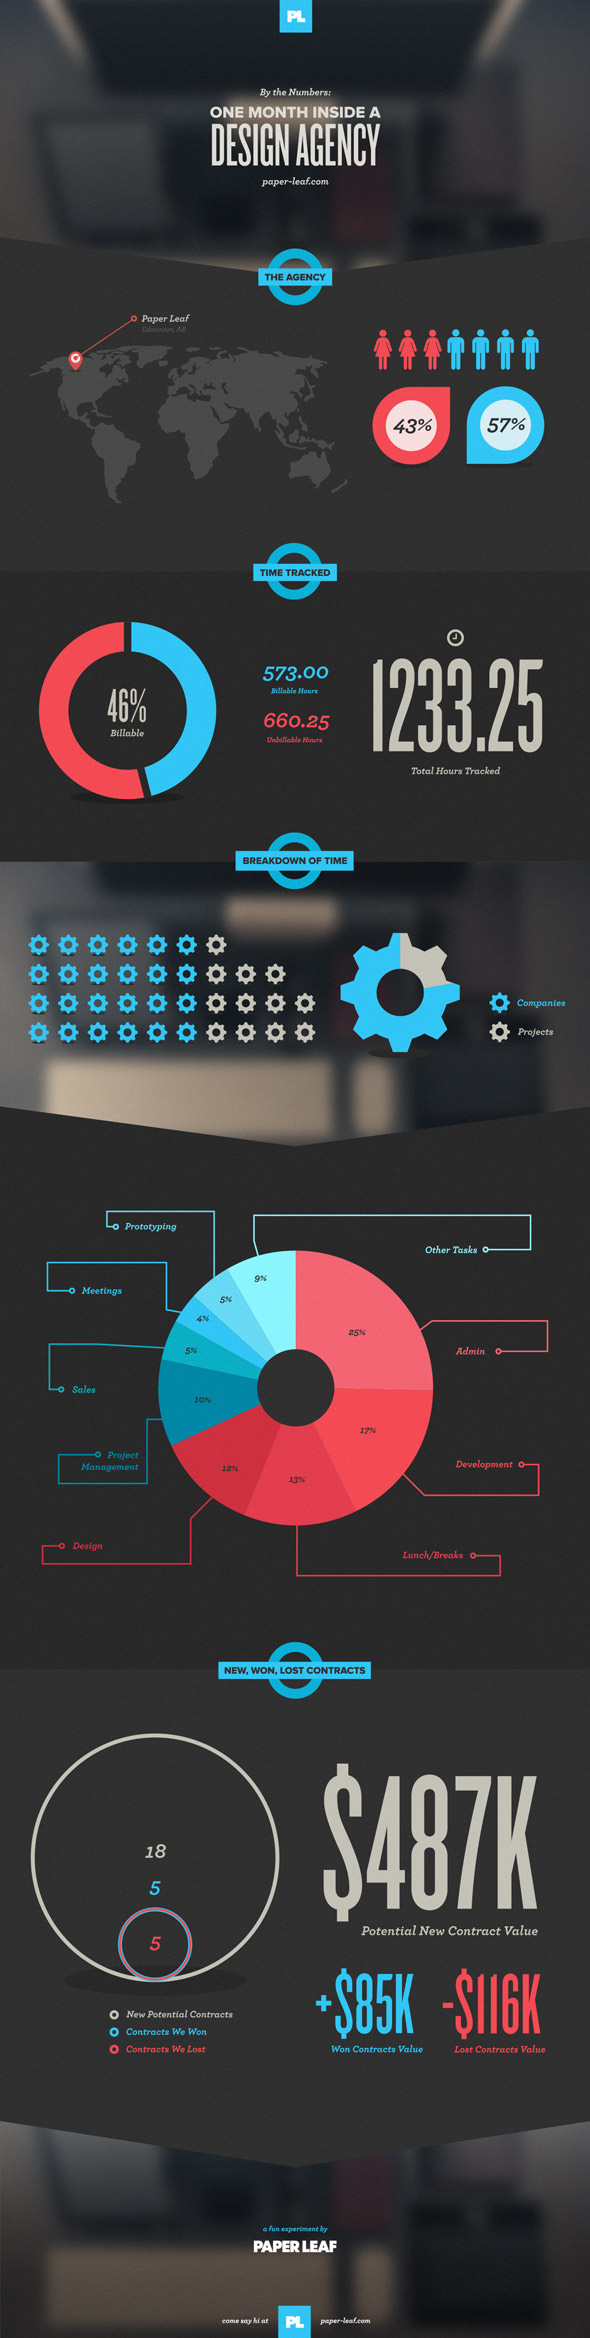 design agency infographic